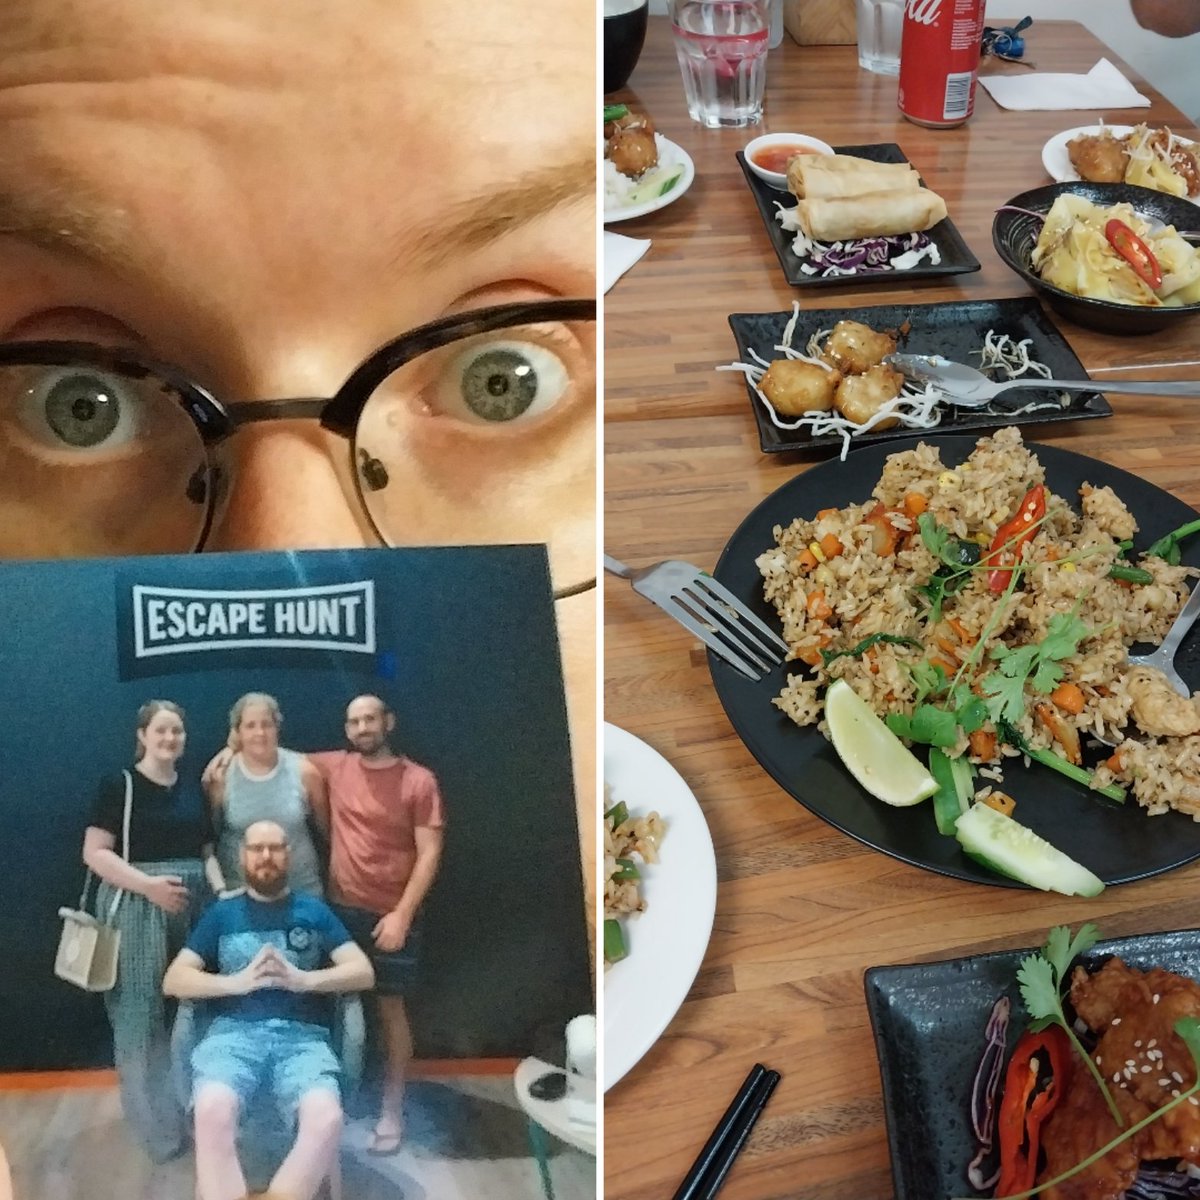 Capped off the birthday with a successful solve of the 'Murder in the Cellar' Escape room at #EscapeHunt and a plant-based banquet at our favourite tea house in Southport. Another great year, bring on the next.